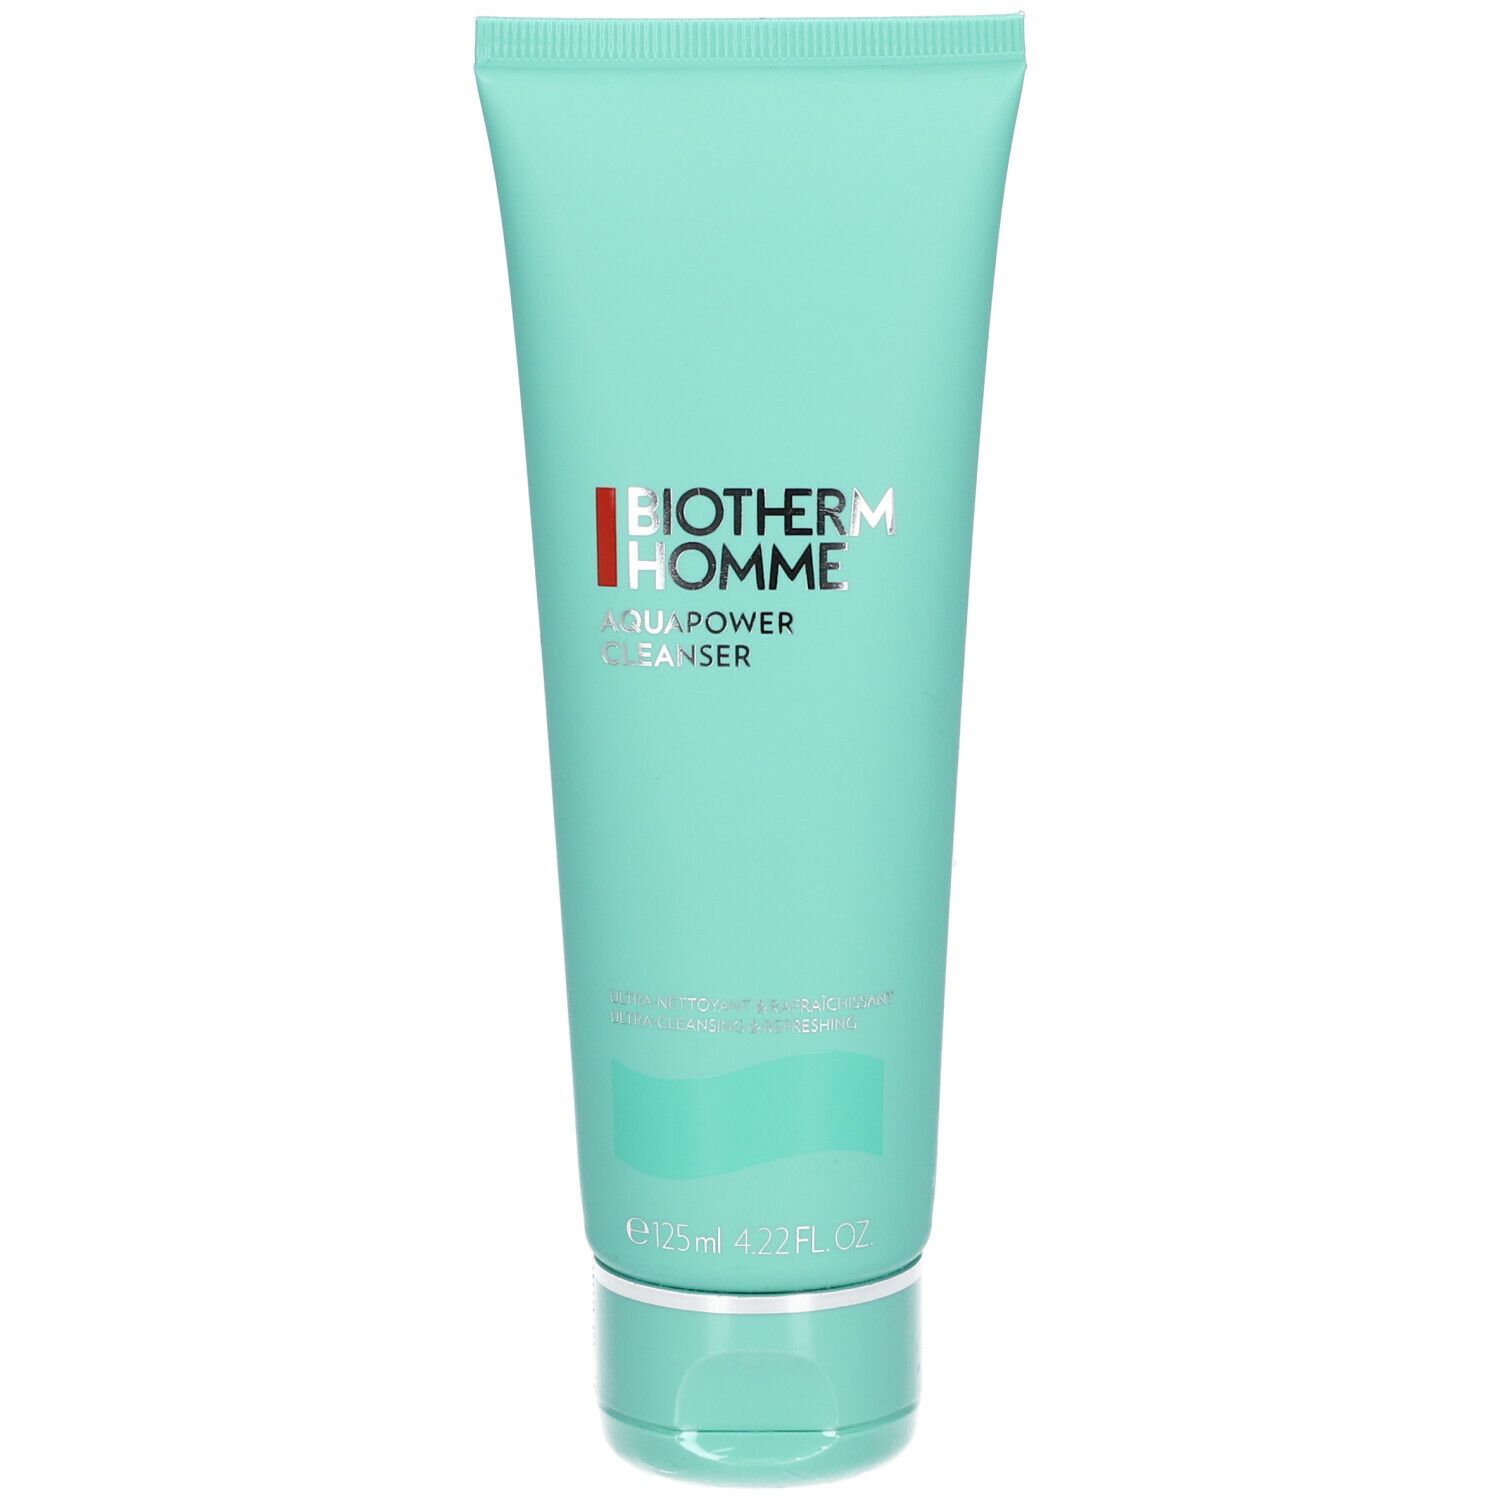 BIOTHERM HOMME Aquapower Cleanser